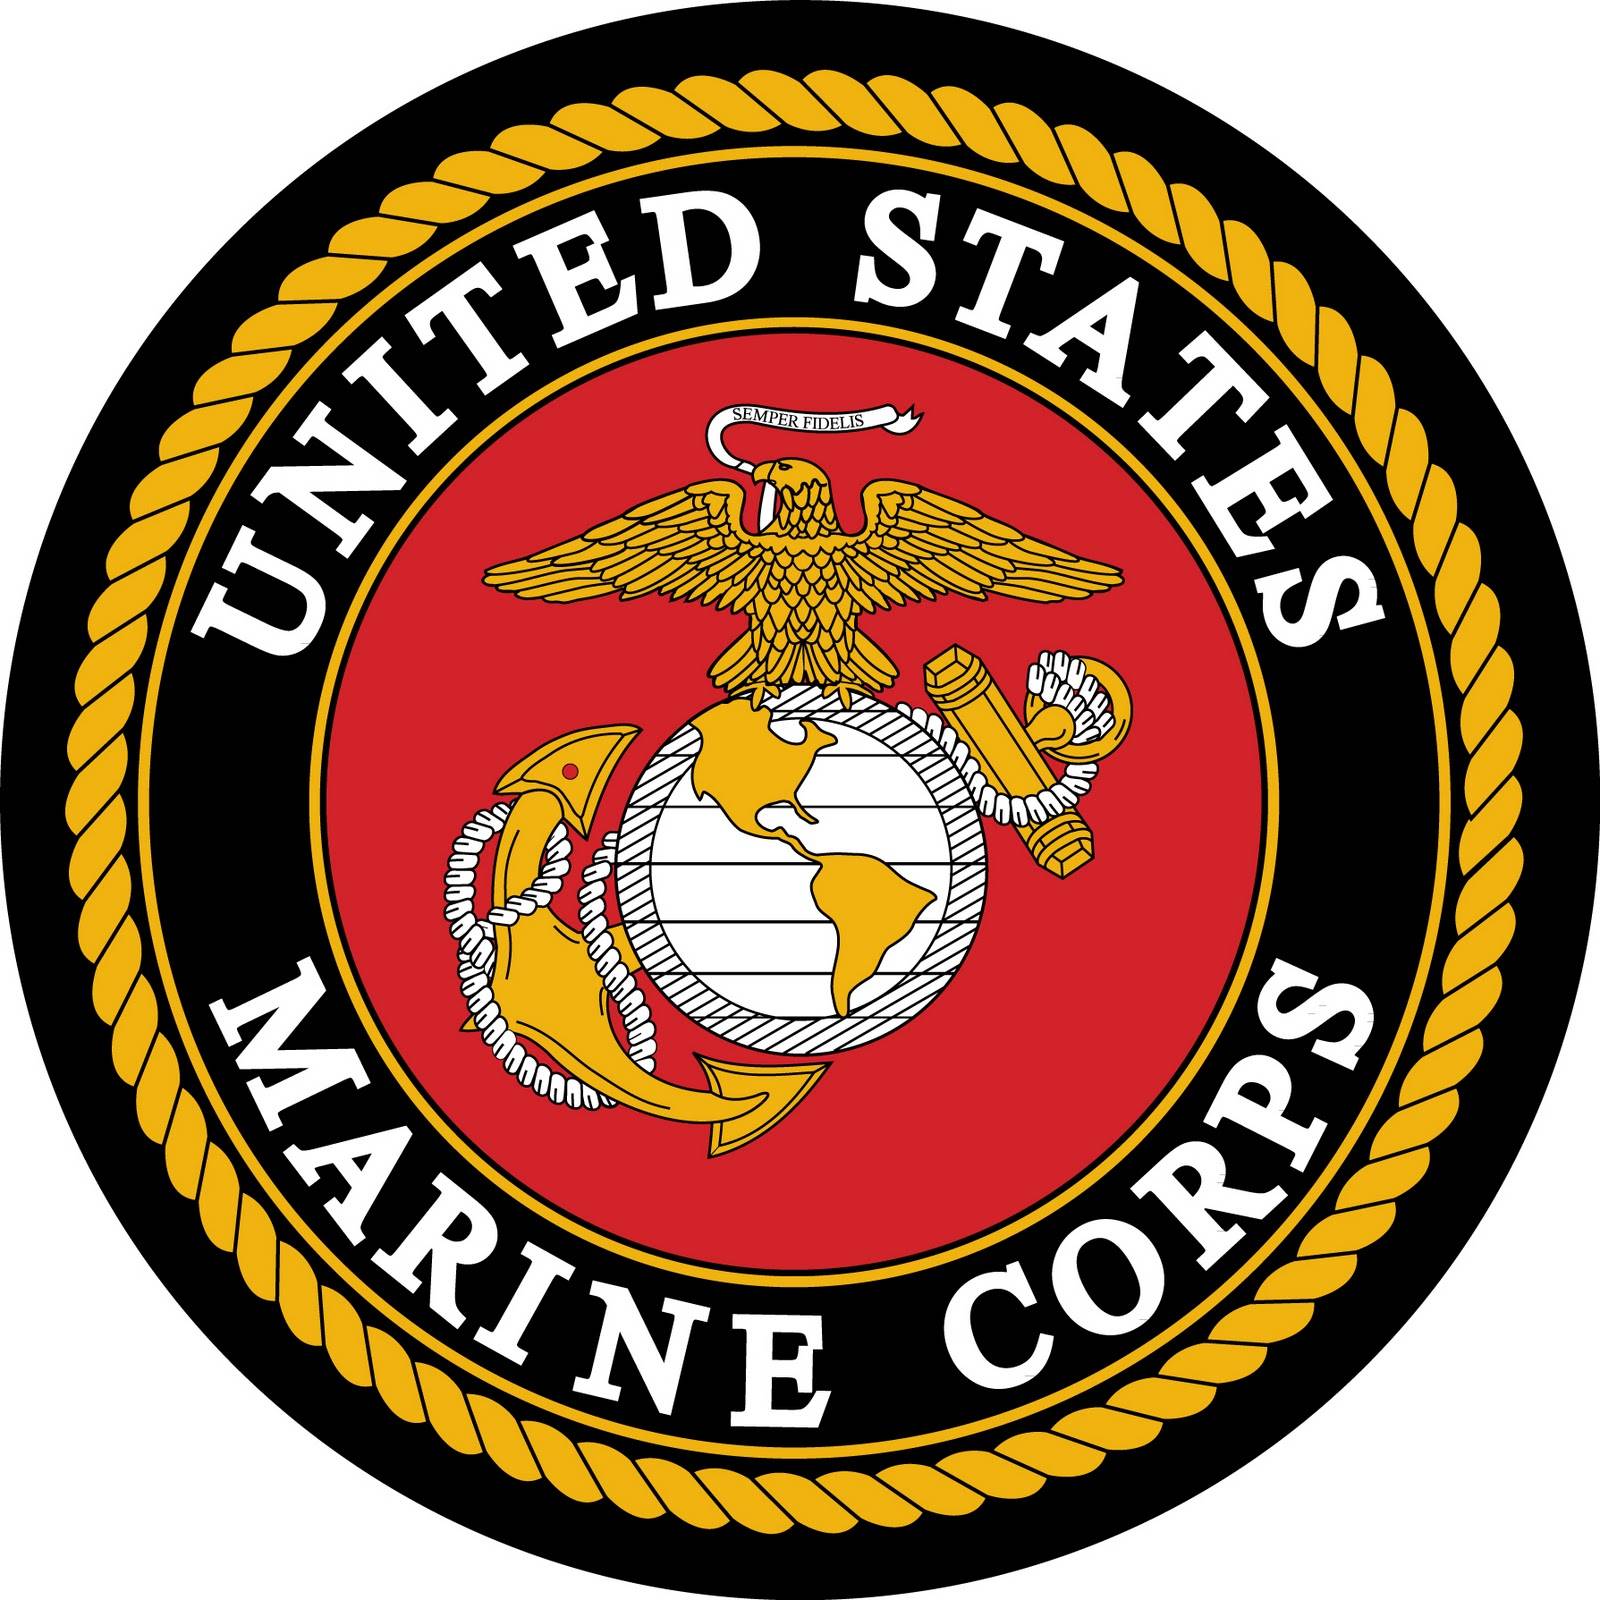 Local graduates from United States Marine Corps boot camp